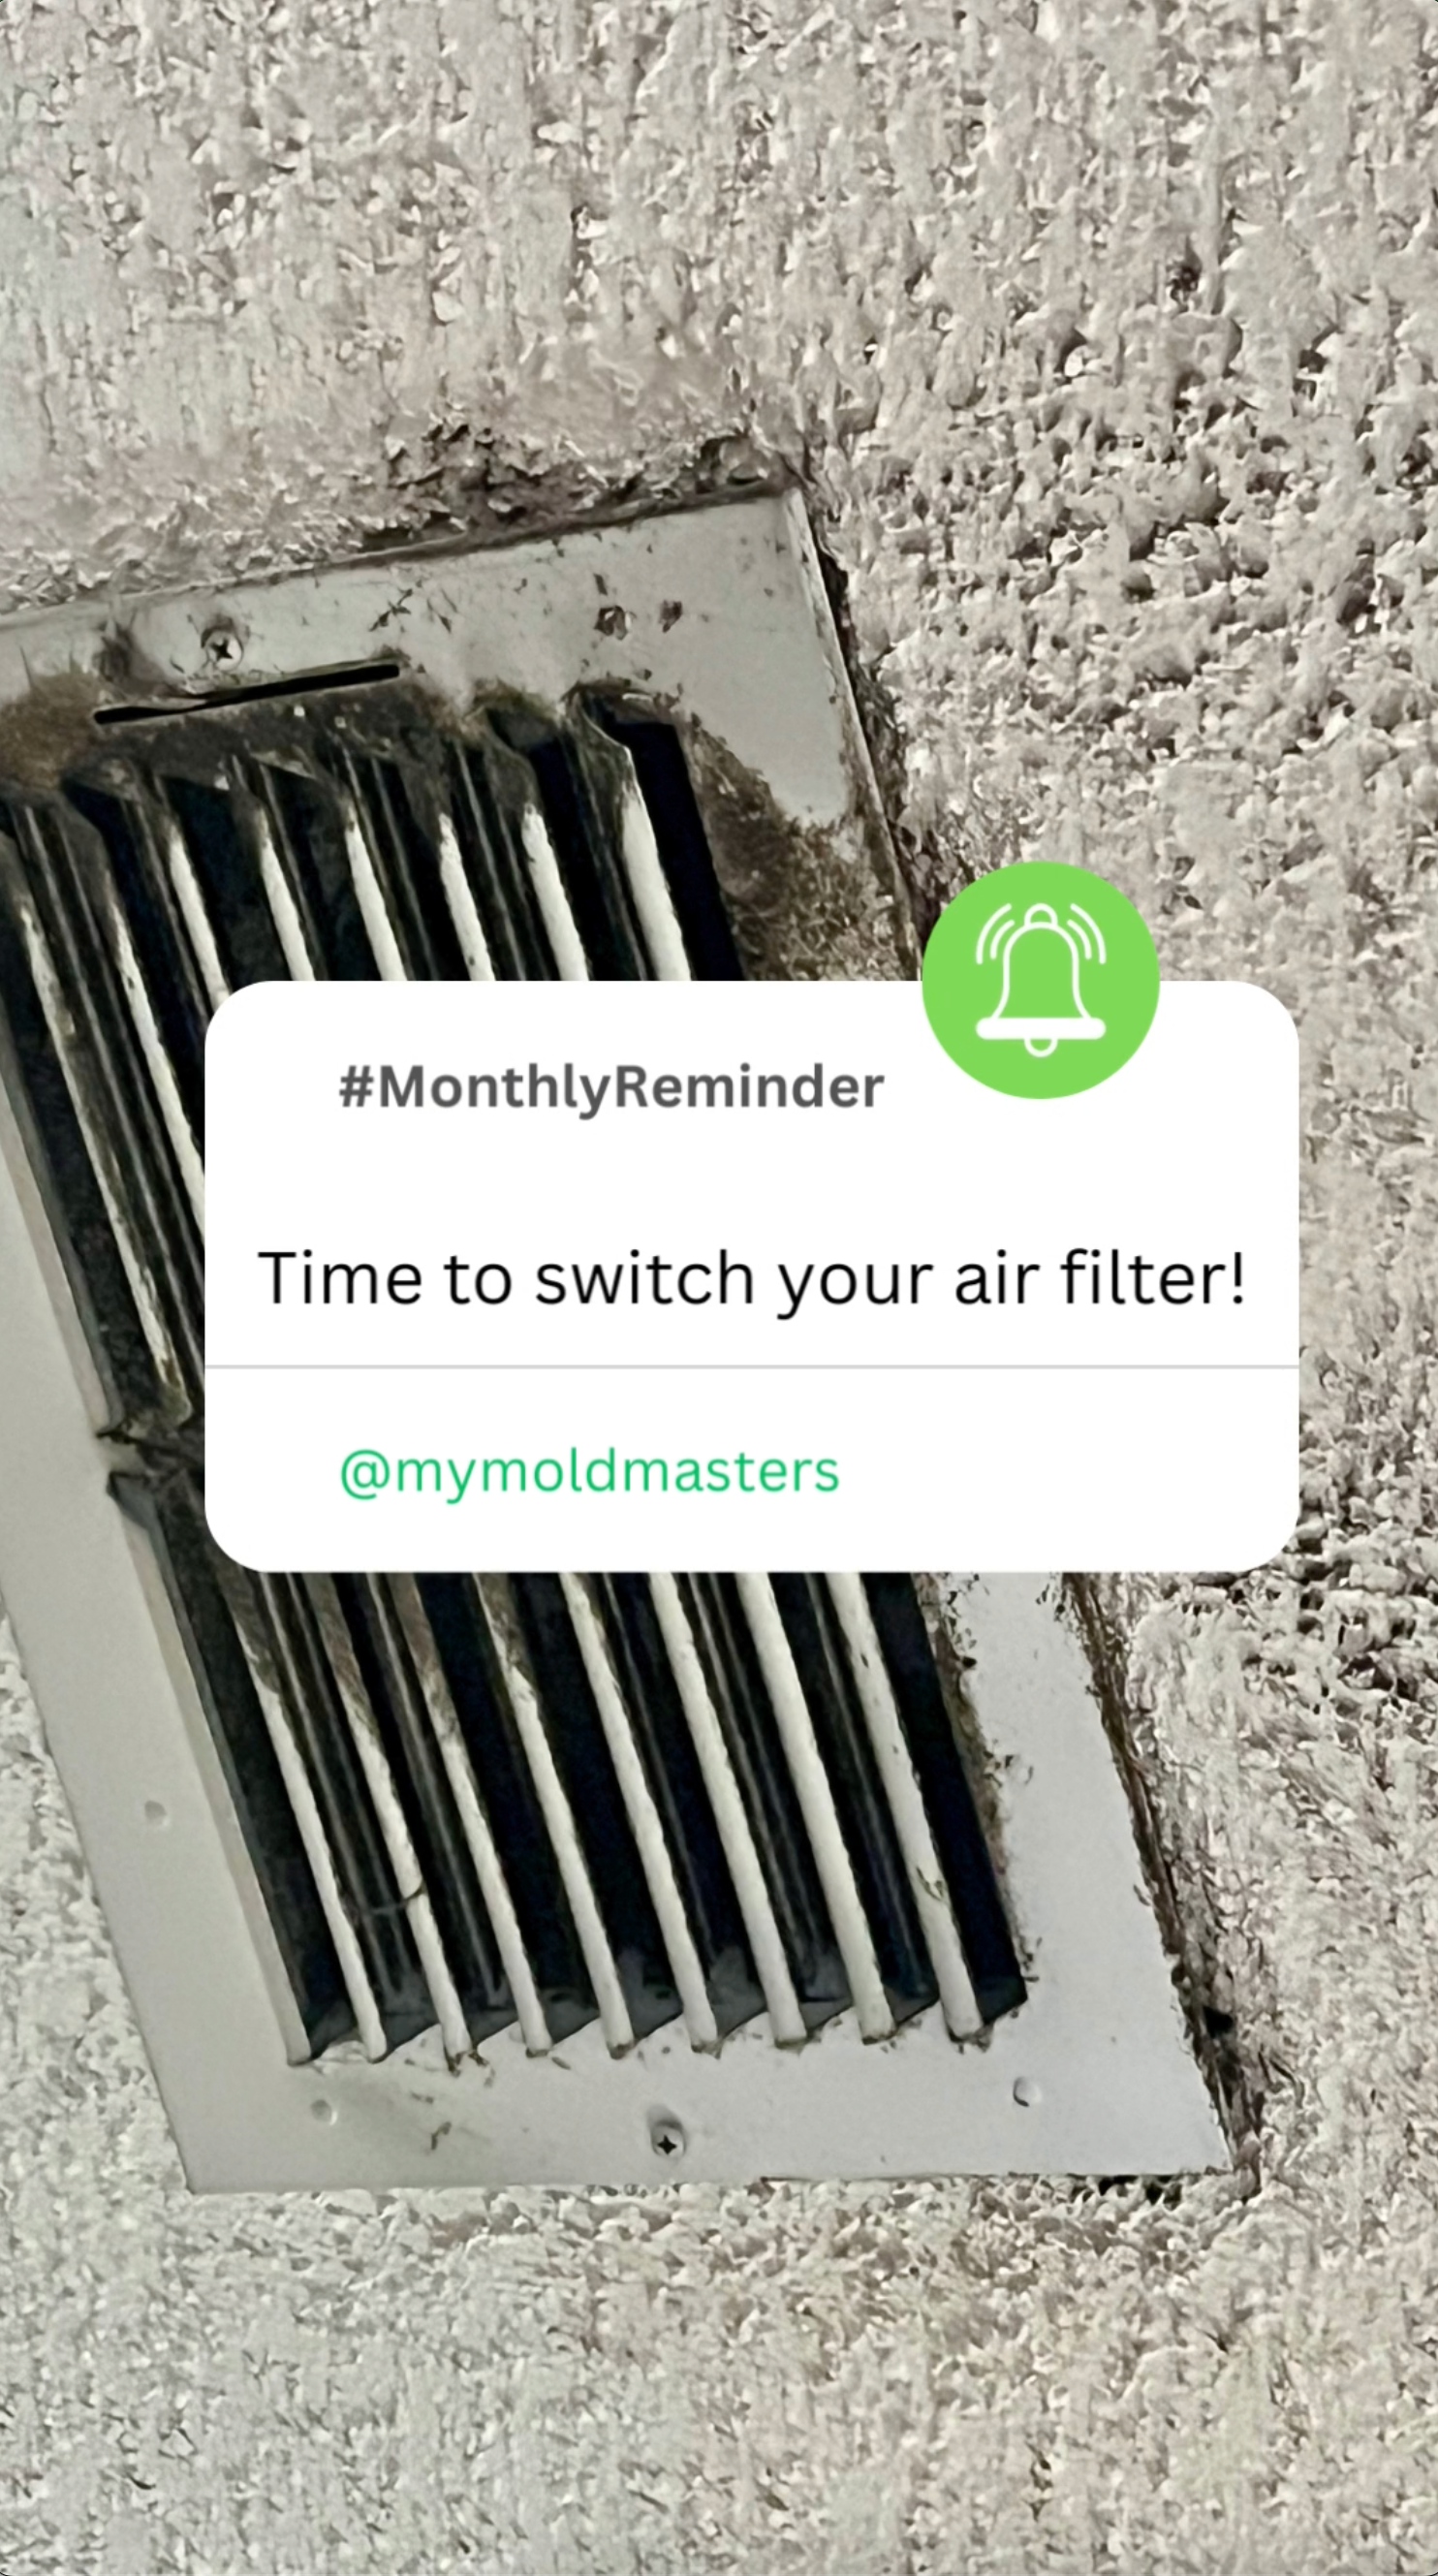 ac filters for mold in home, mold on vent. ac mold, house smells musty, ac leak, ac filter mold